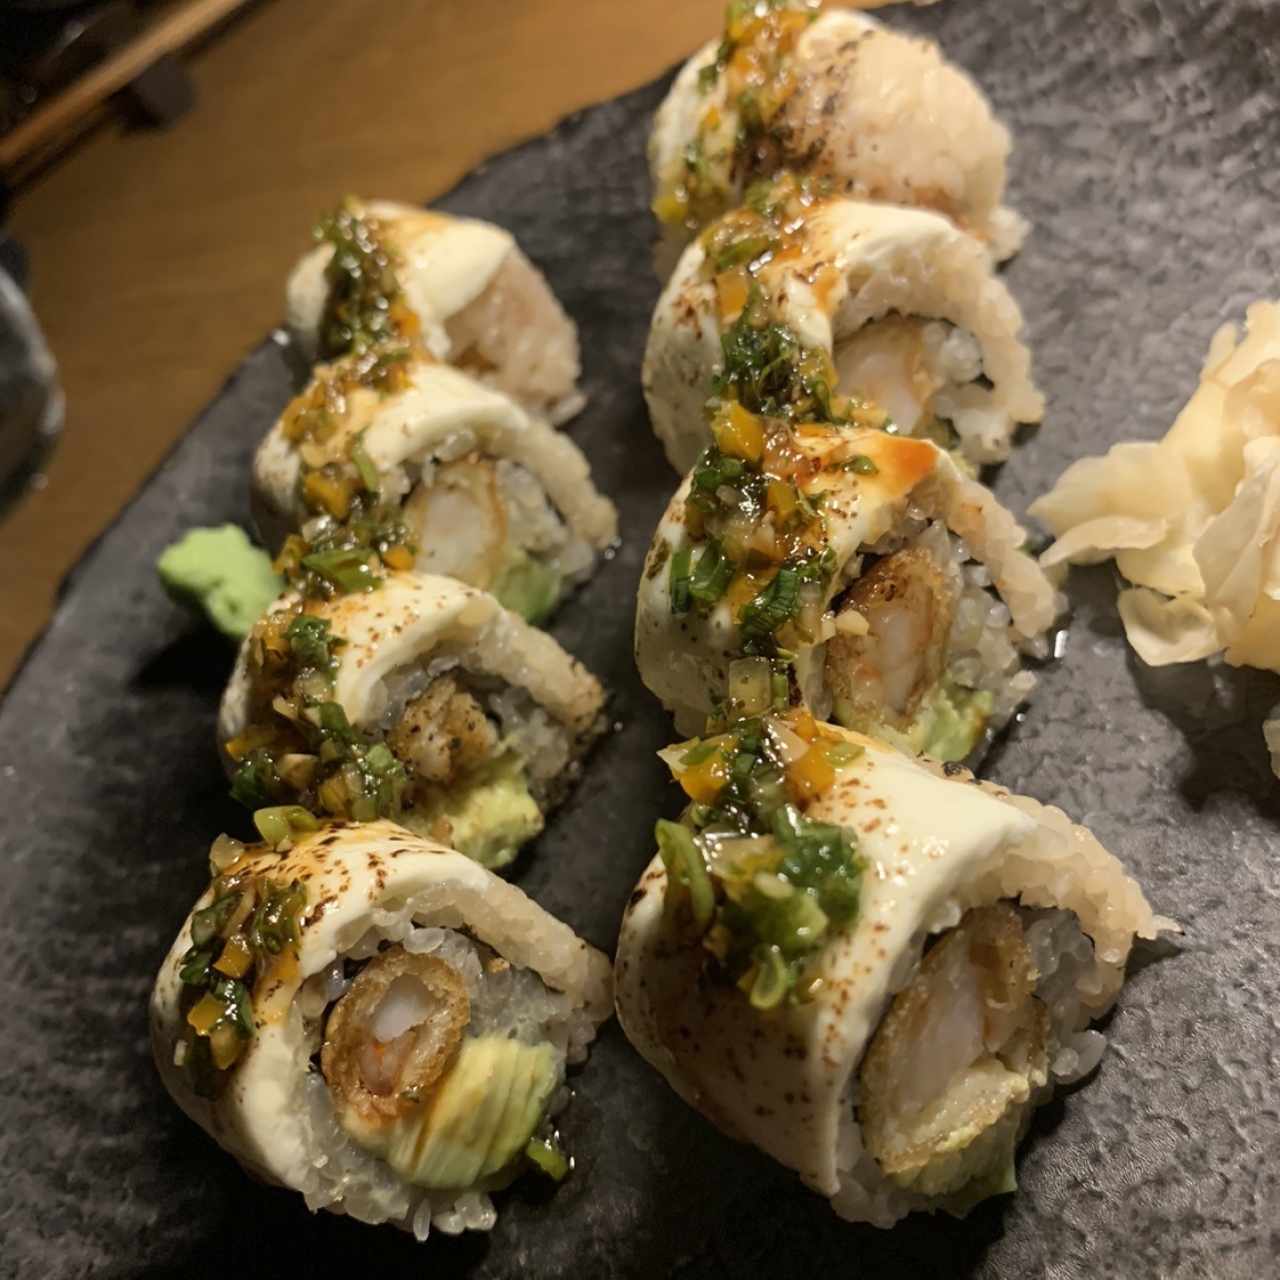 Makis - Spicy Roll